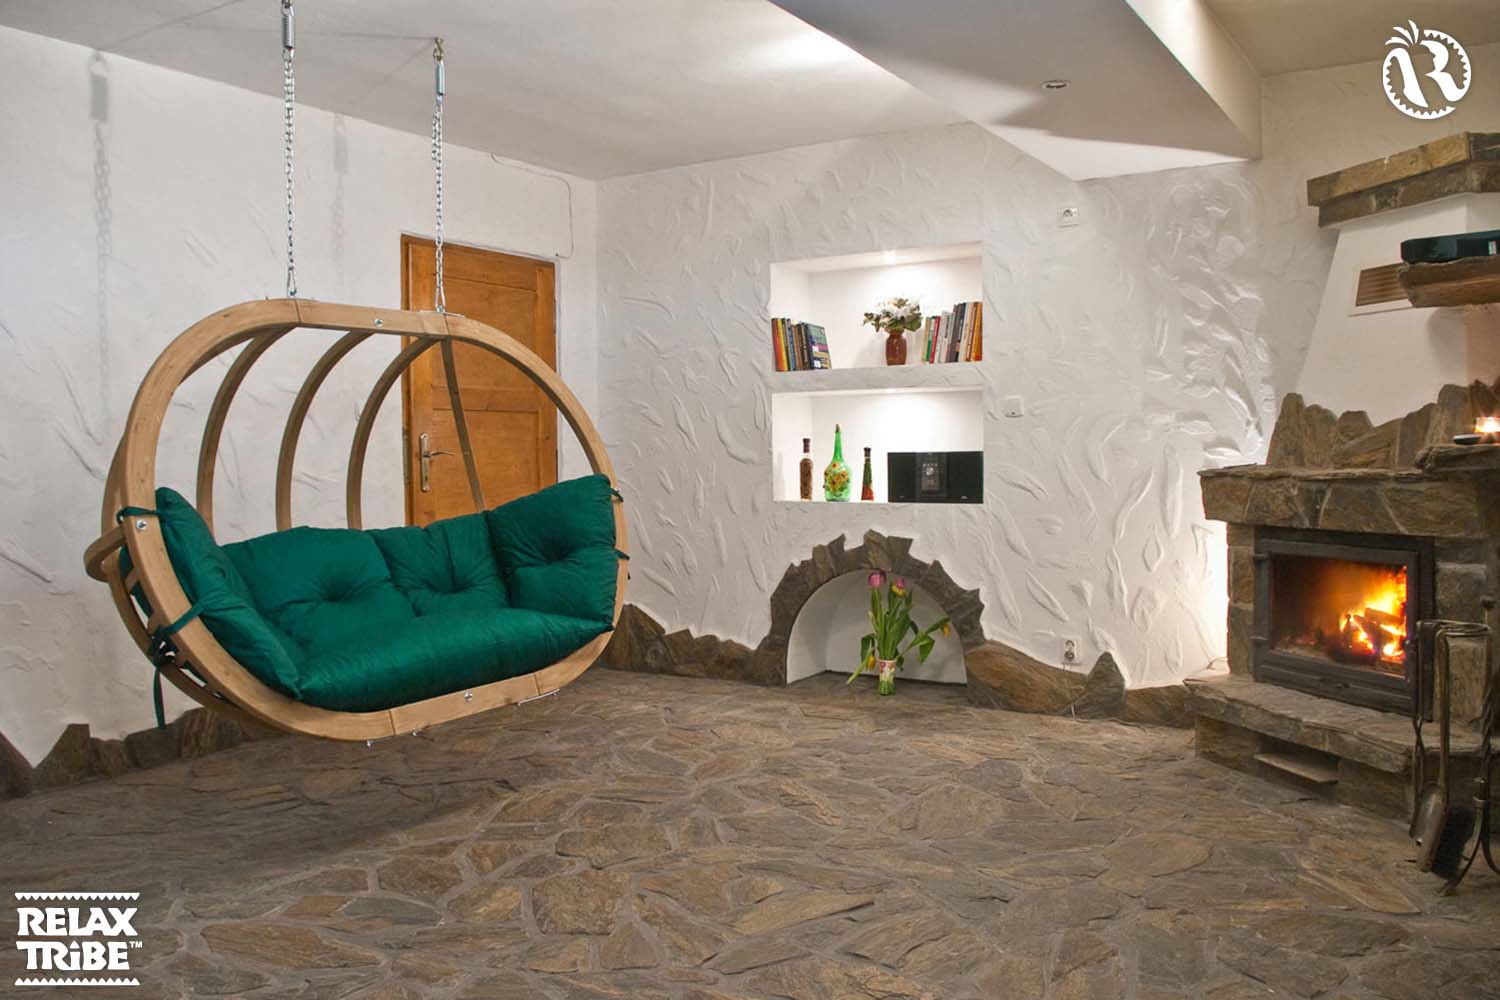 globo-royal-chair-verde-double-family-home-garden-xl-hanging-sofa-fsc-wood-cushion-weatherproof-green-indoor-ceiling